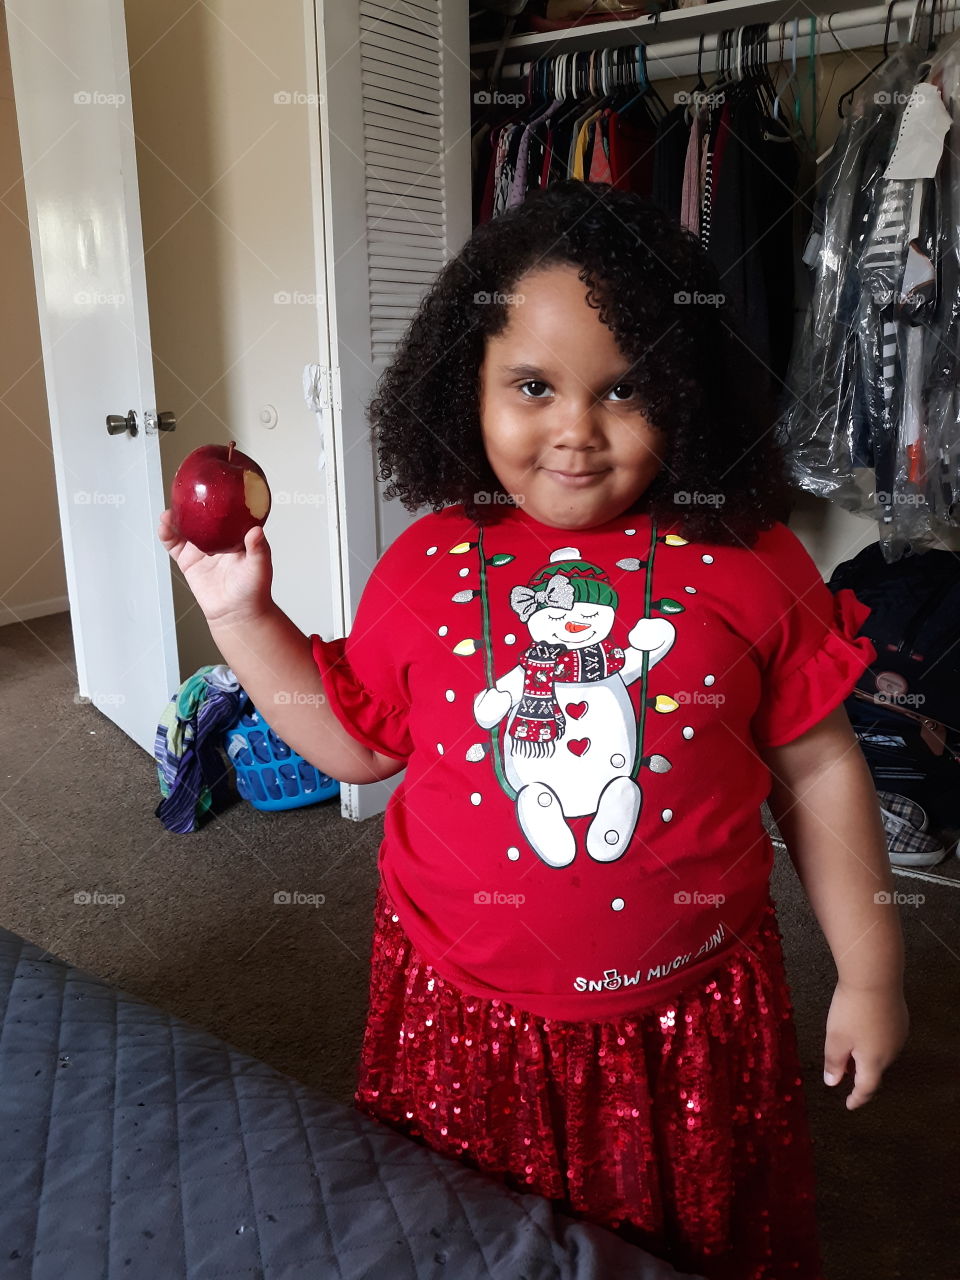 daughter with apple at Christmas